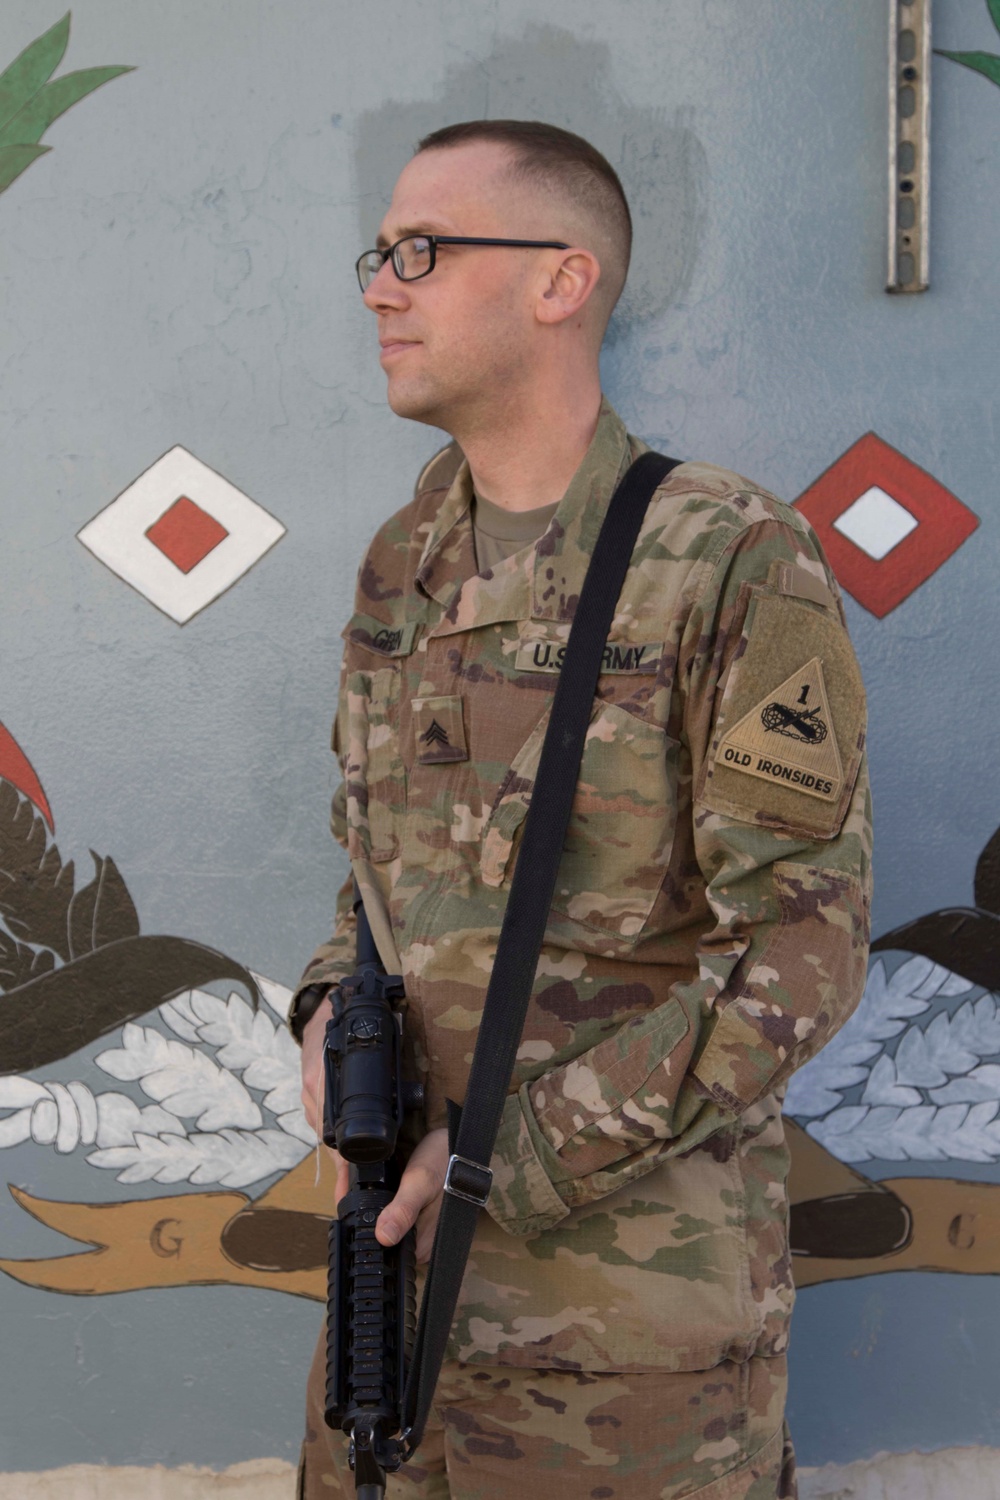 Sgt. James Green at his outpost in Task Force-Southeast